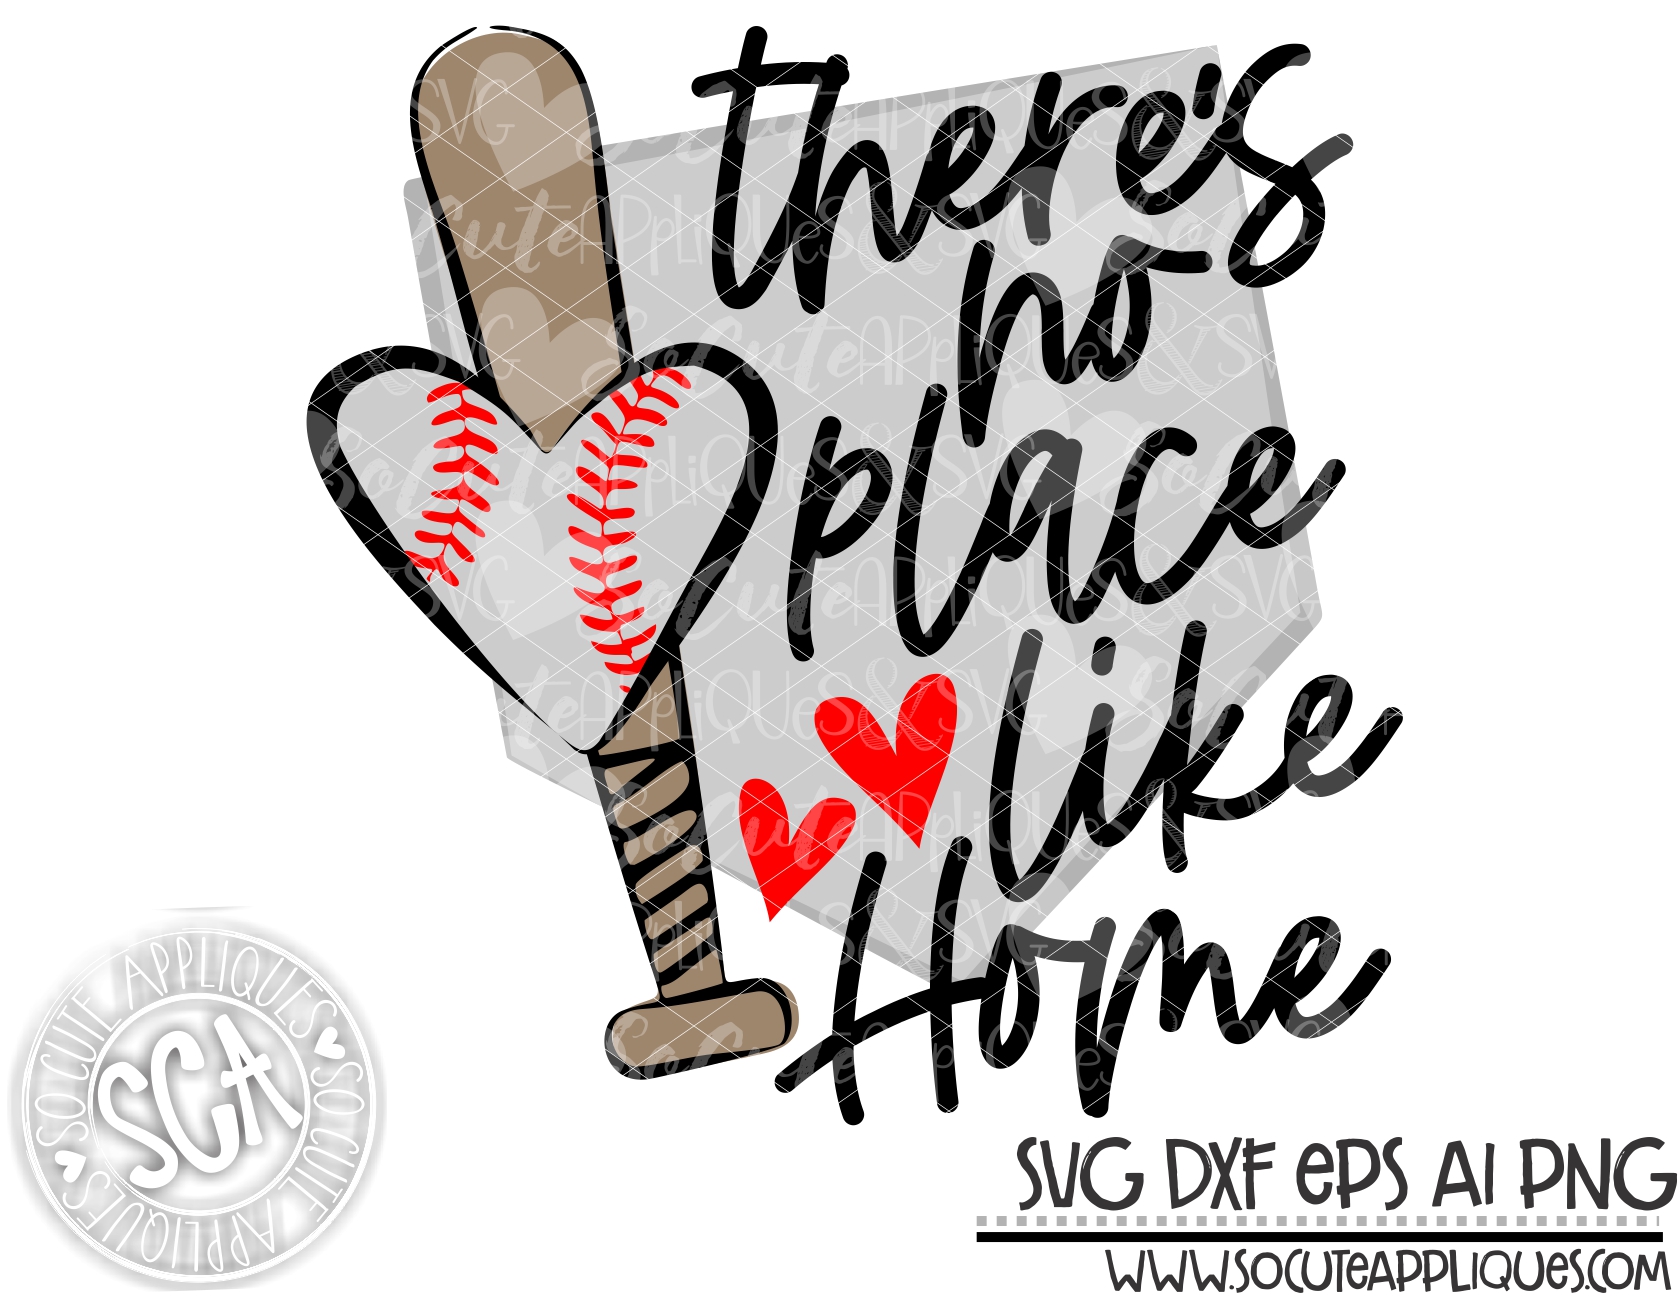 Download Theres No Place Like Home Baseball Base 19 Svg Sca Socuteappliques Net